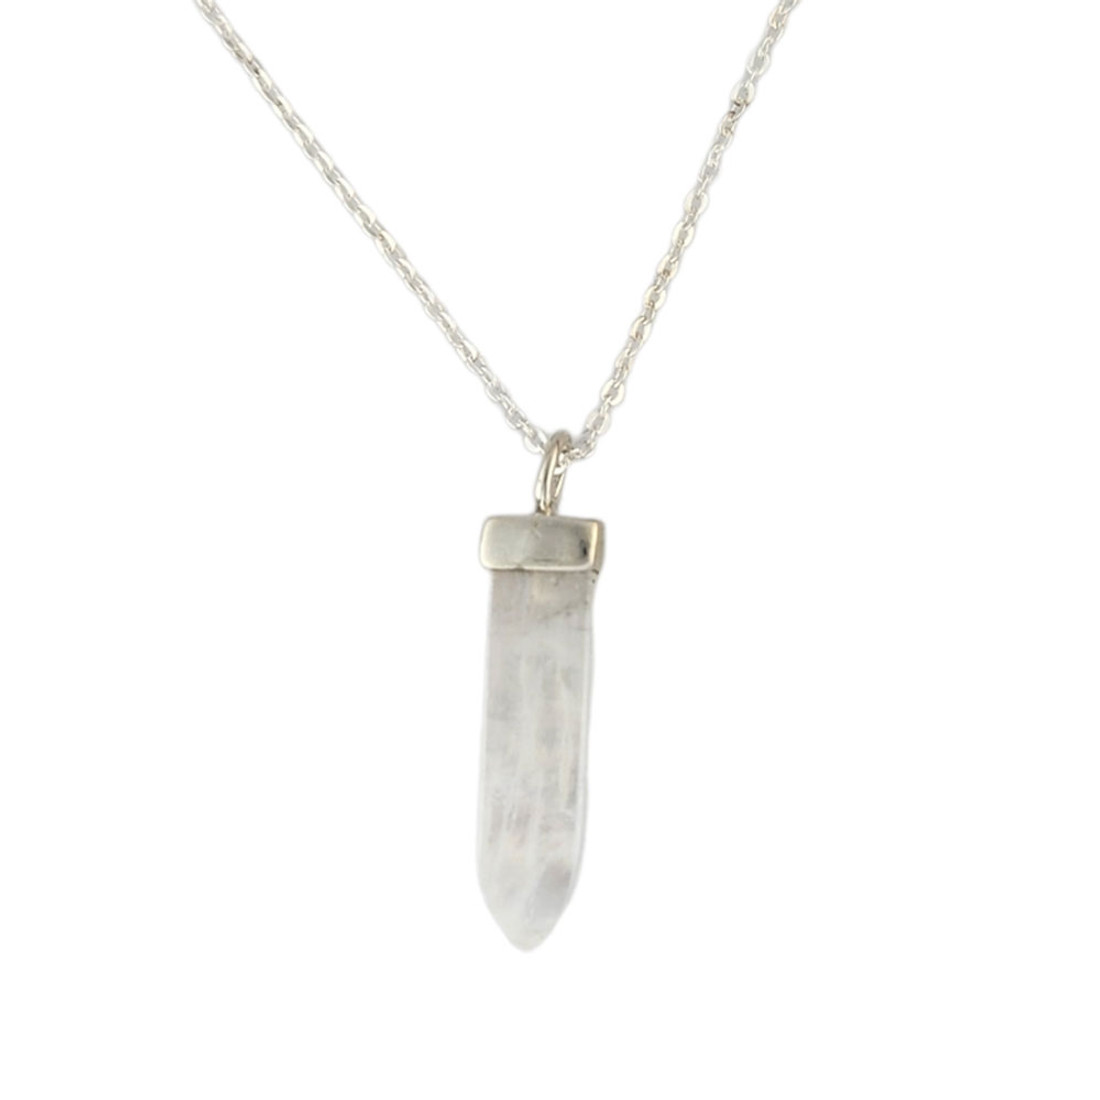 Moonstone point pendant on a chain necklace. 